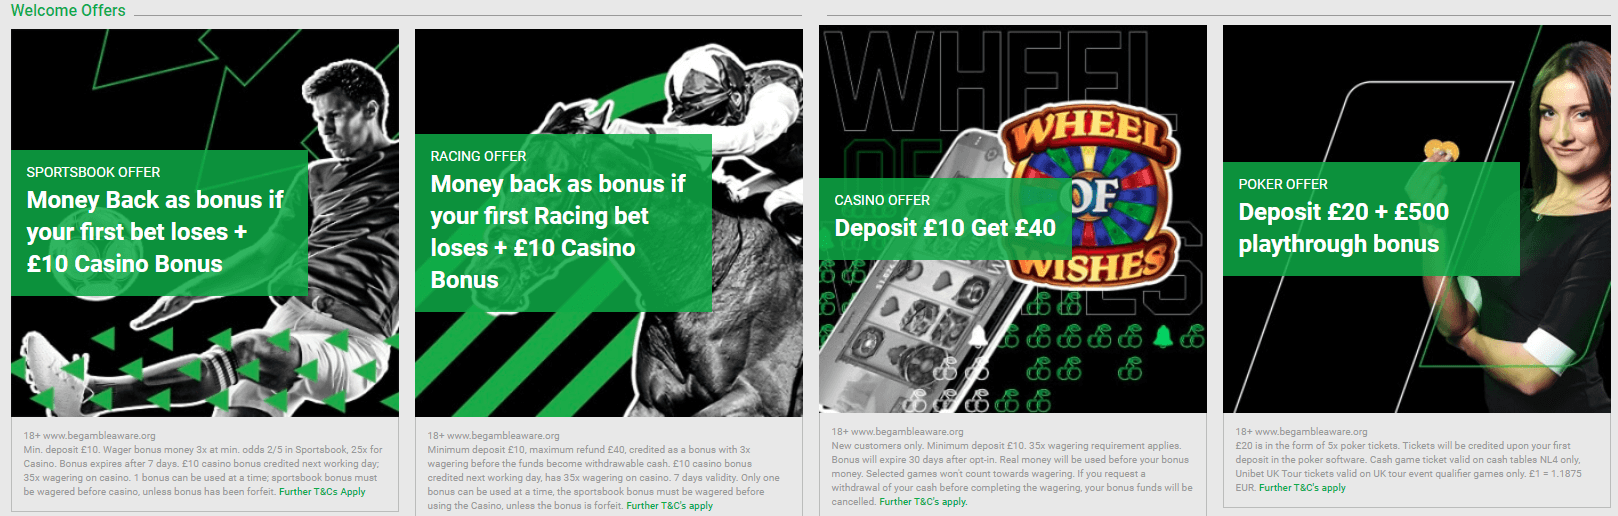 Unitbet welcome offers